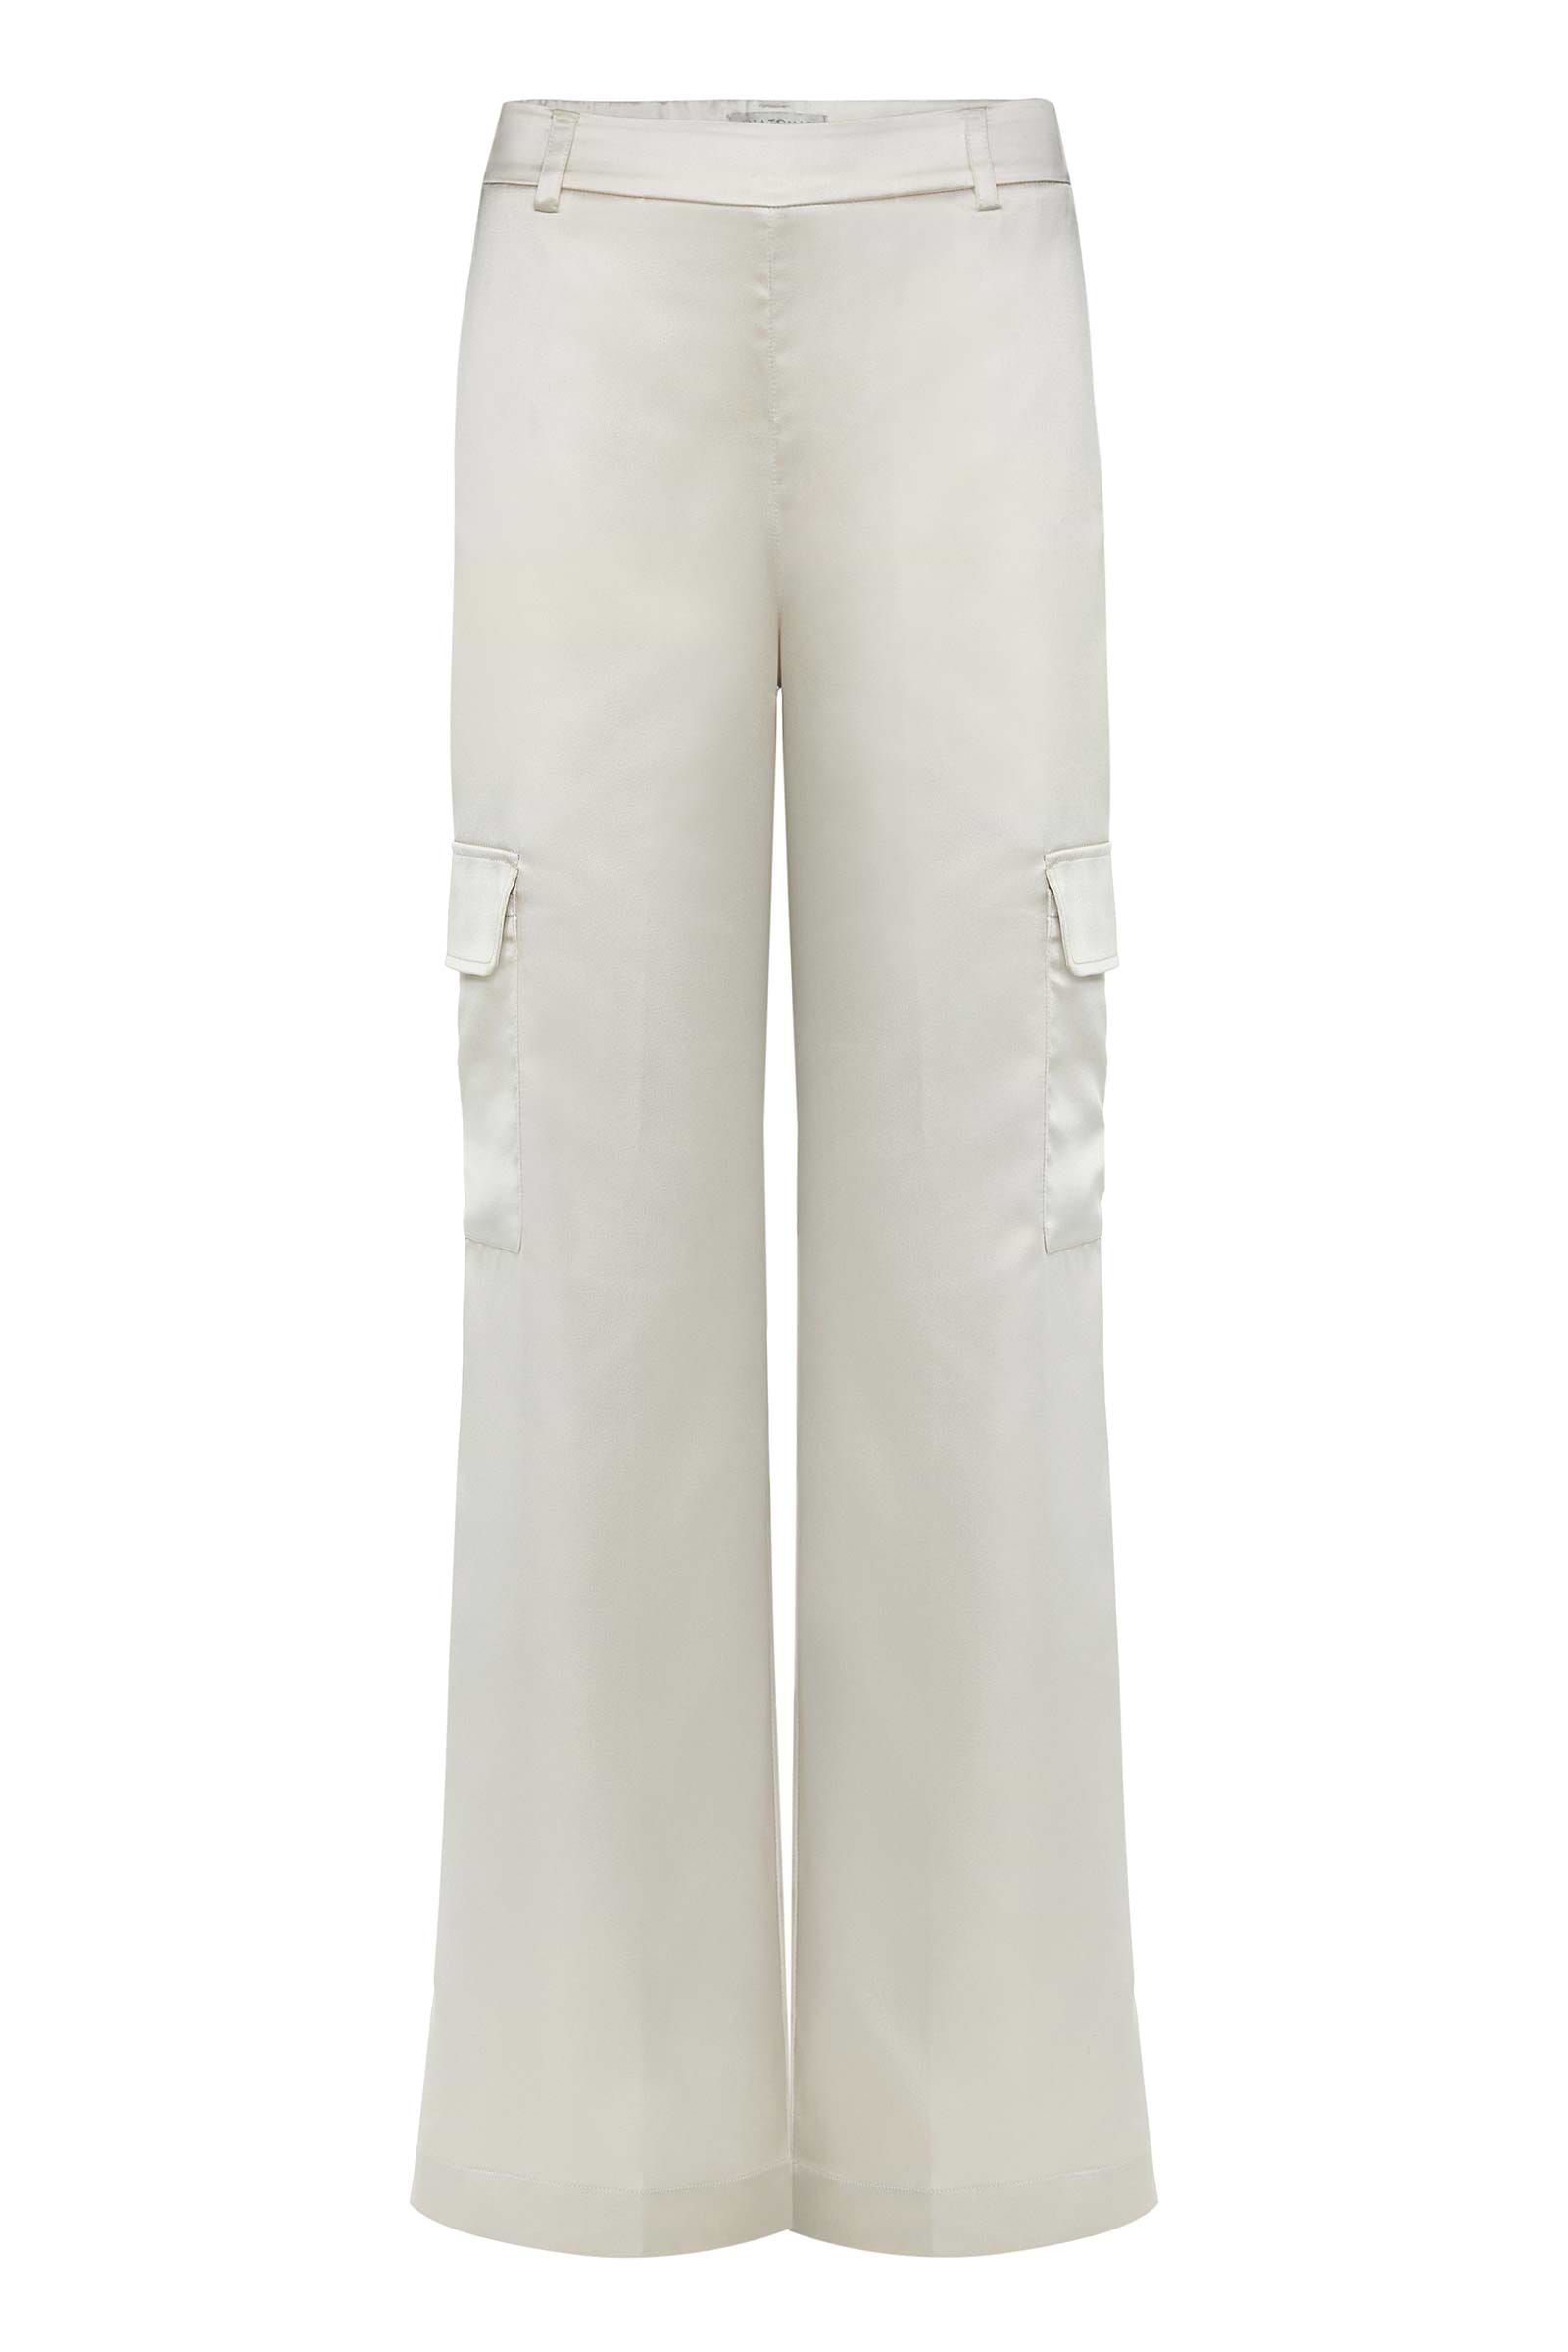 The Best Travel Pant. Flat Lay of a Candela Satin Pant in Stone.